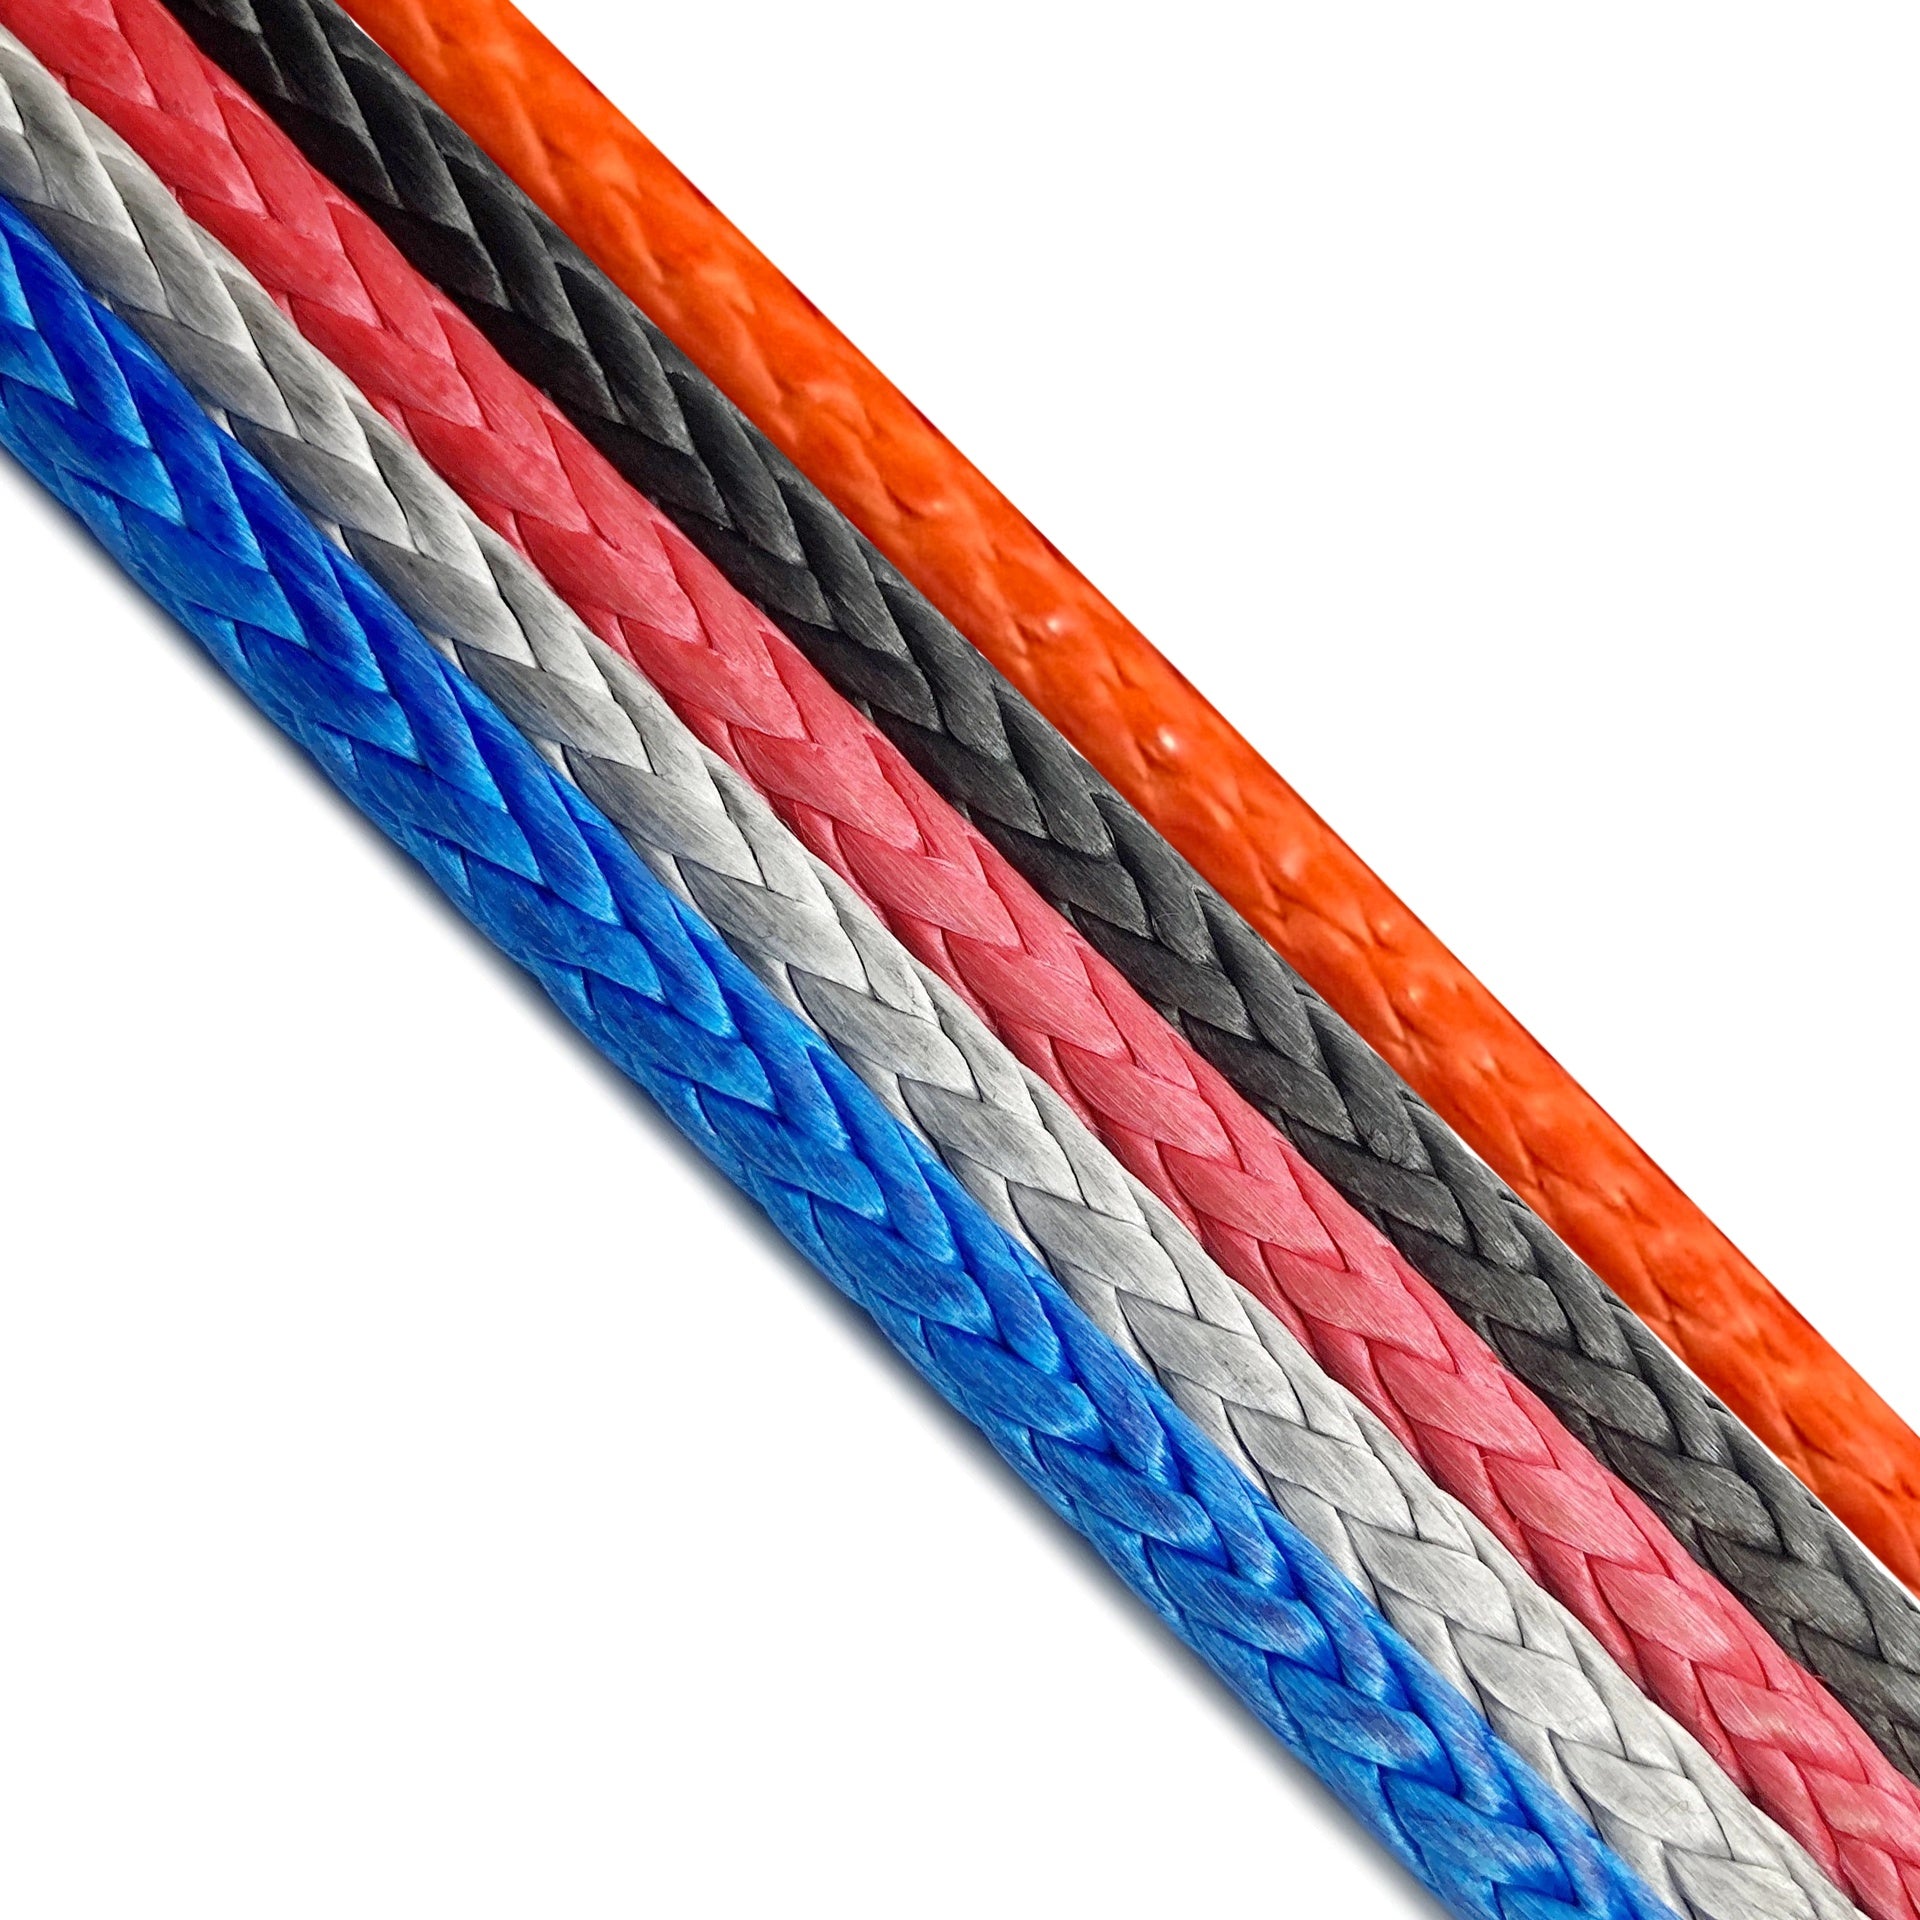 Utility Constrictor Rope Amsteel Blue 7/64 - (pair) ANY COLOR COMBO